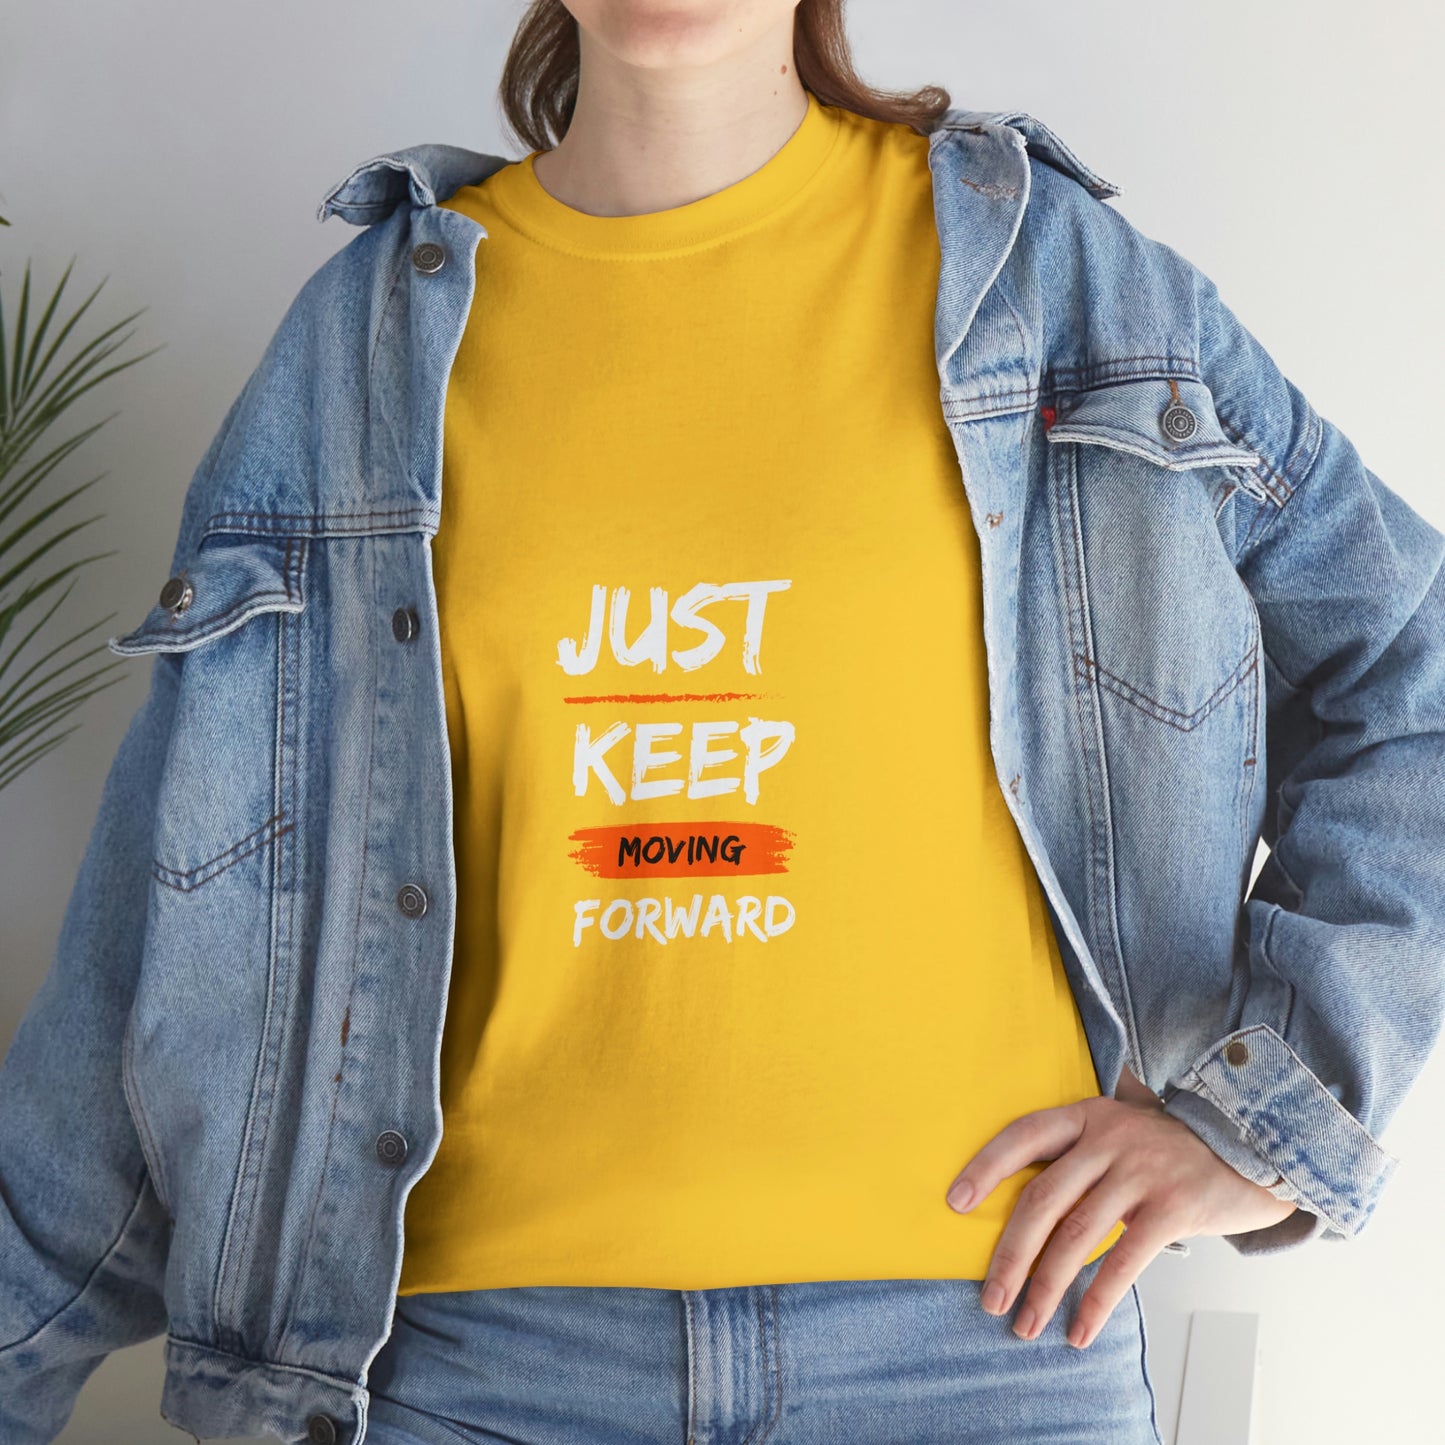 Keep moving forward Your Style  Our Custom Printed Tee Unique Design Comfortable Fit  Personalized for You.  color, funny tshirt tee shirt